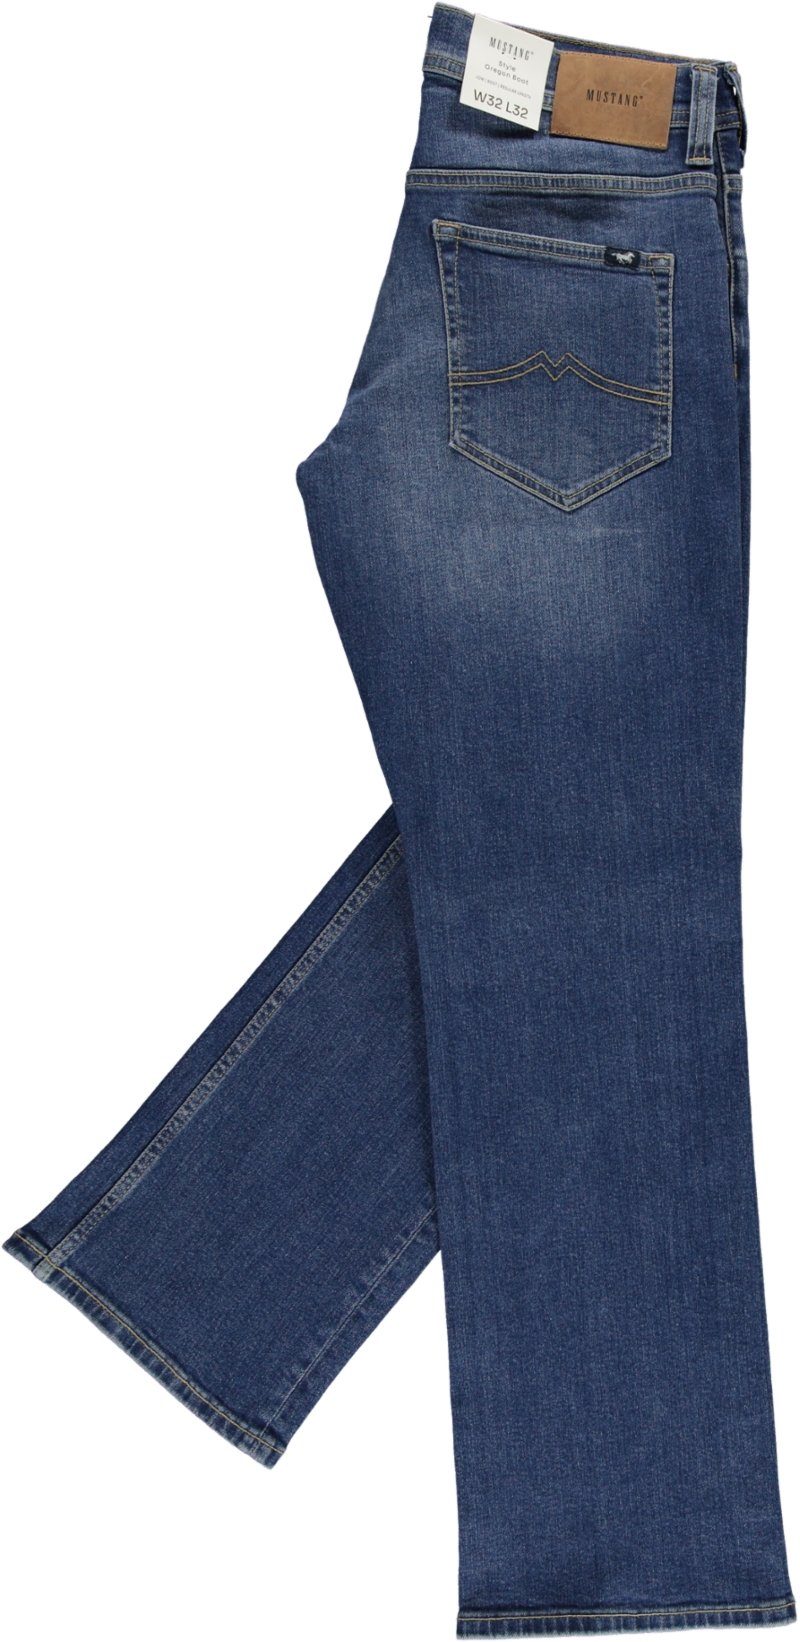 Oregon medium Bootcut-Jeans MUSTANG Style Boot